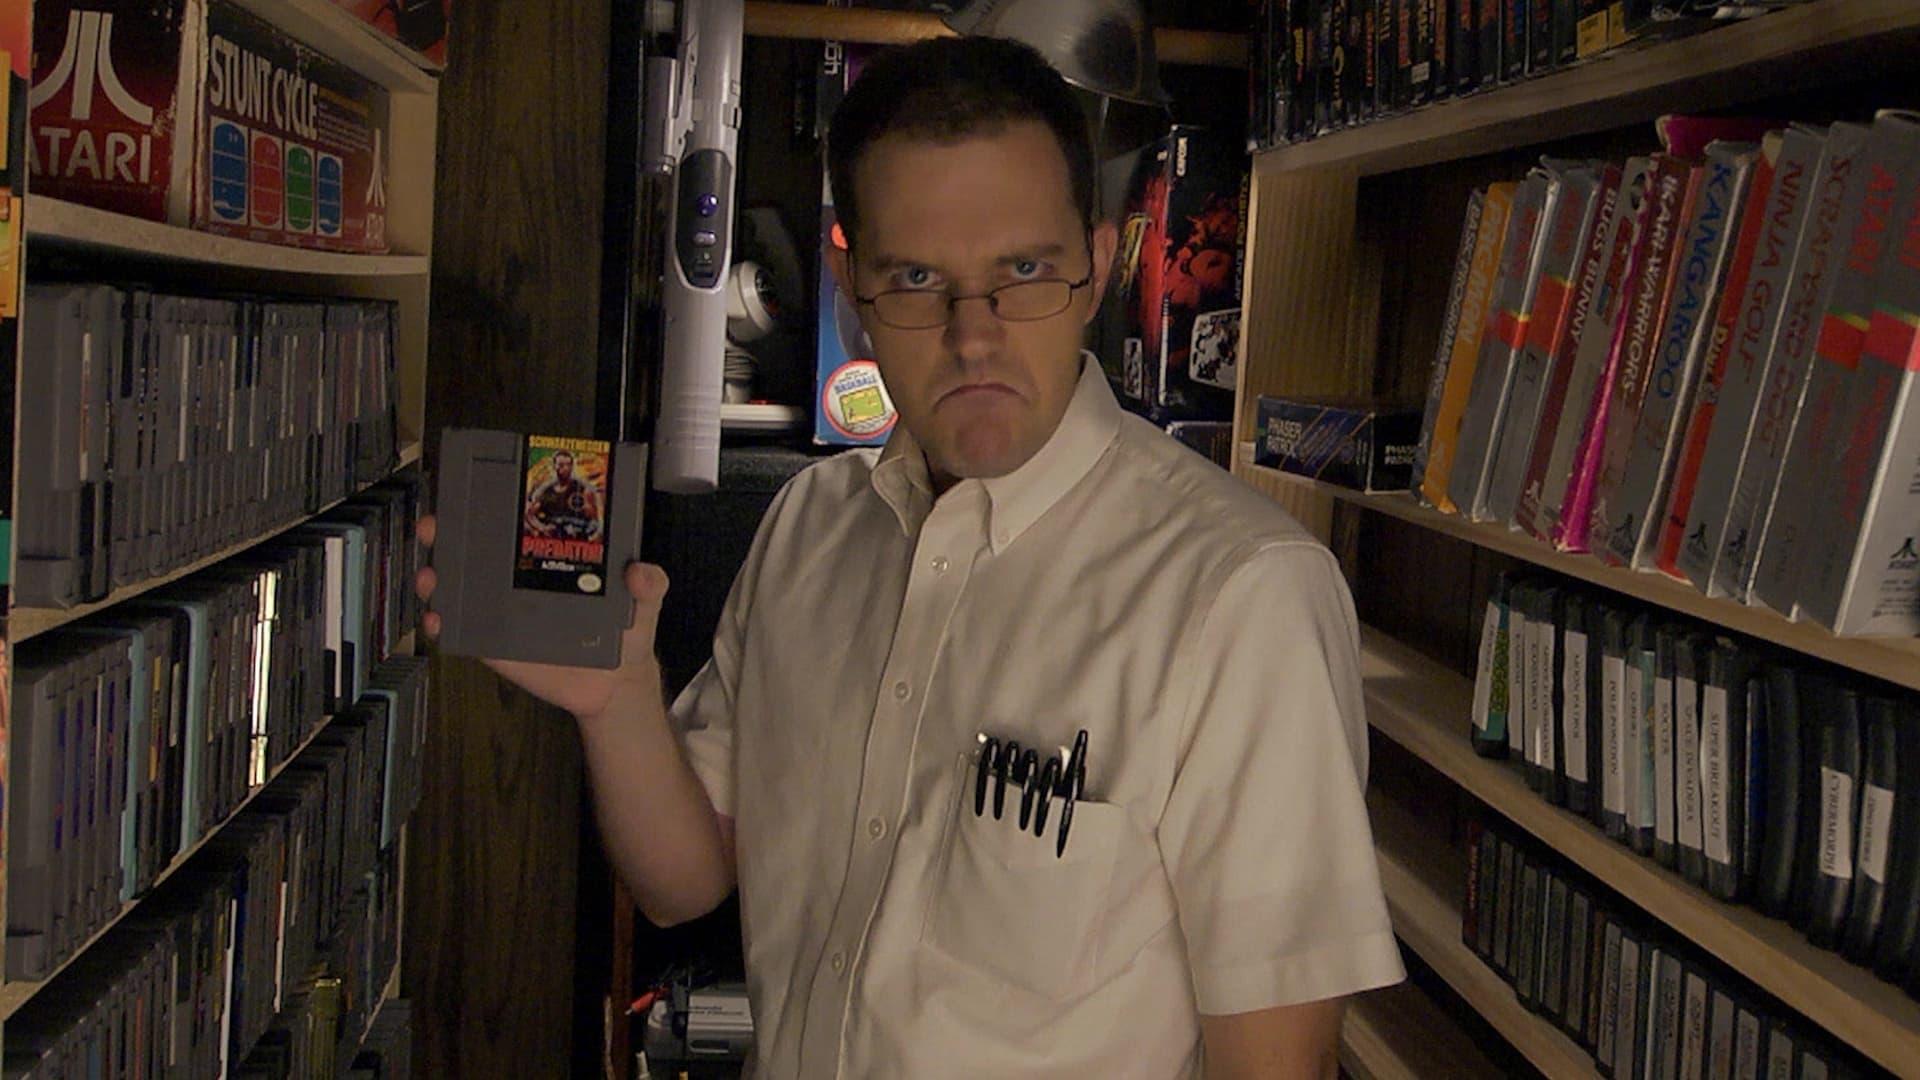 The Angry Video Game Nerd backdrop